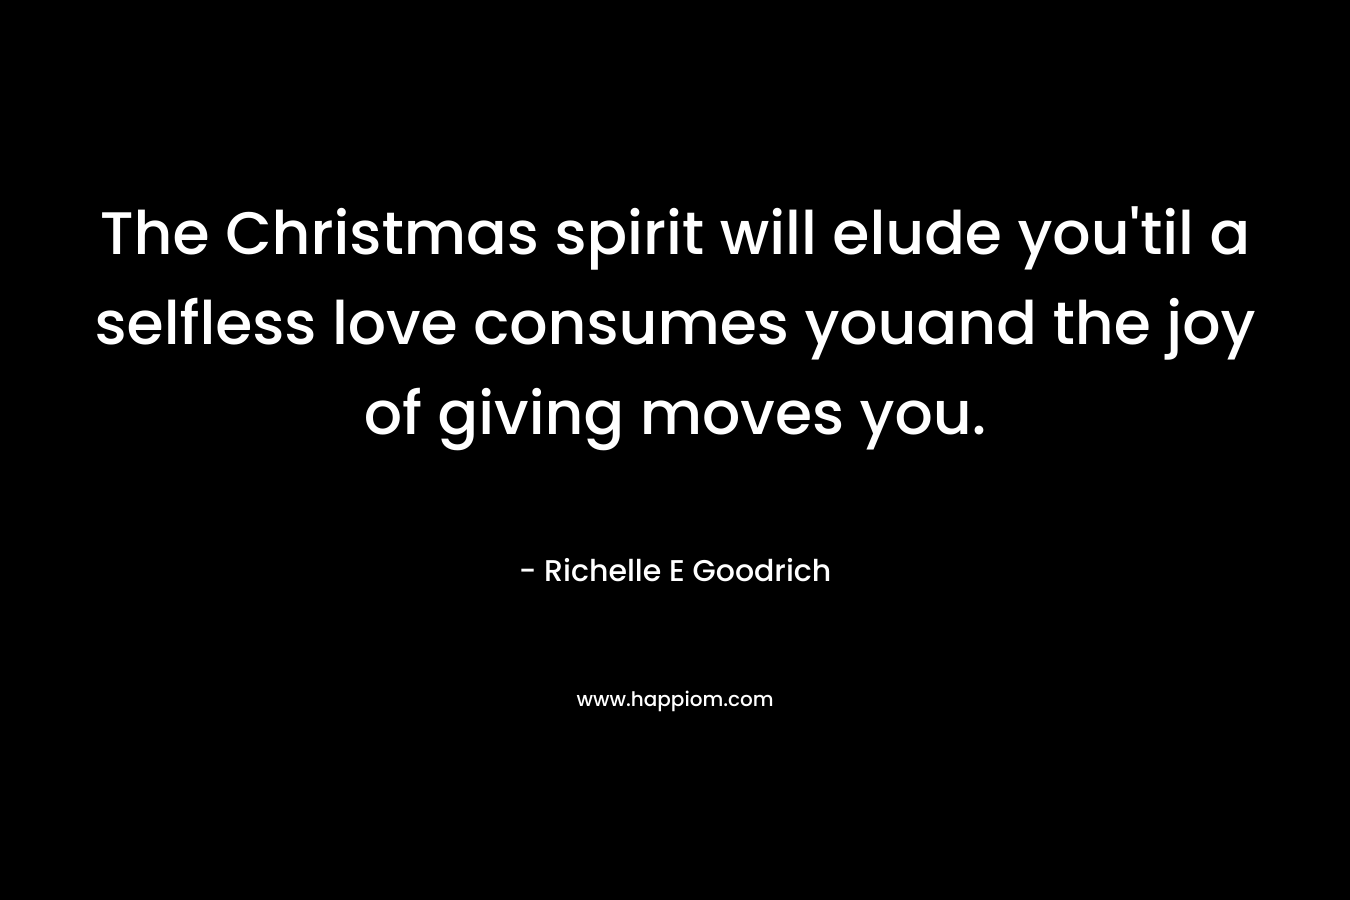 The Christmas spirit will elude you'til a selfless love consumes youand the joy of giving moves you.